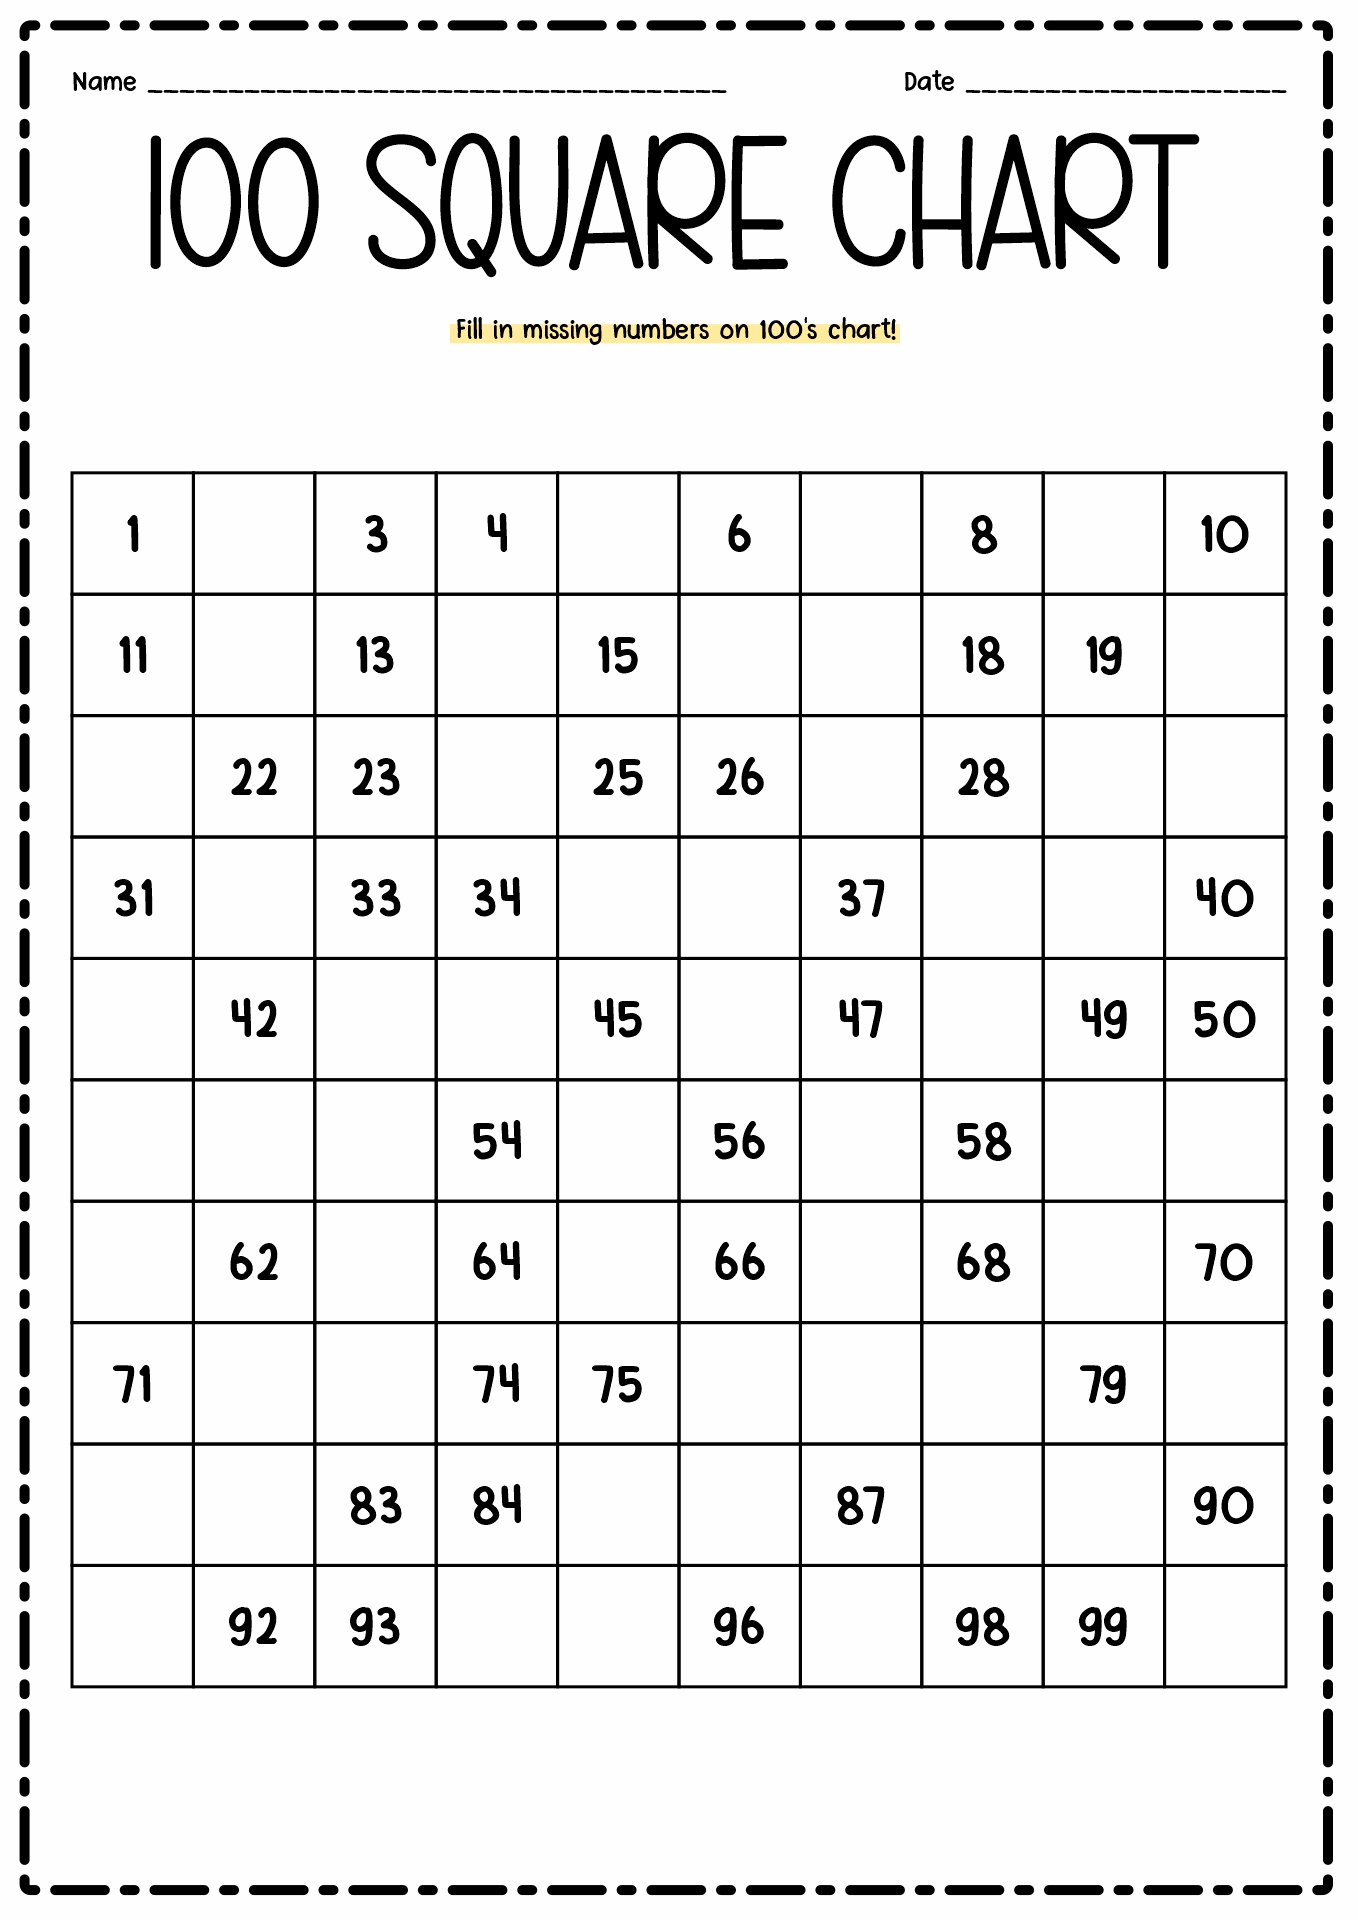 12-best-images-of-hundreds-square-worksheet-missing-puzzle-with-numbers-in-squares-100-number